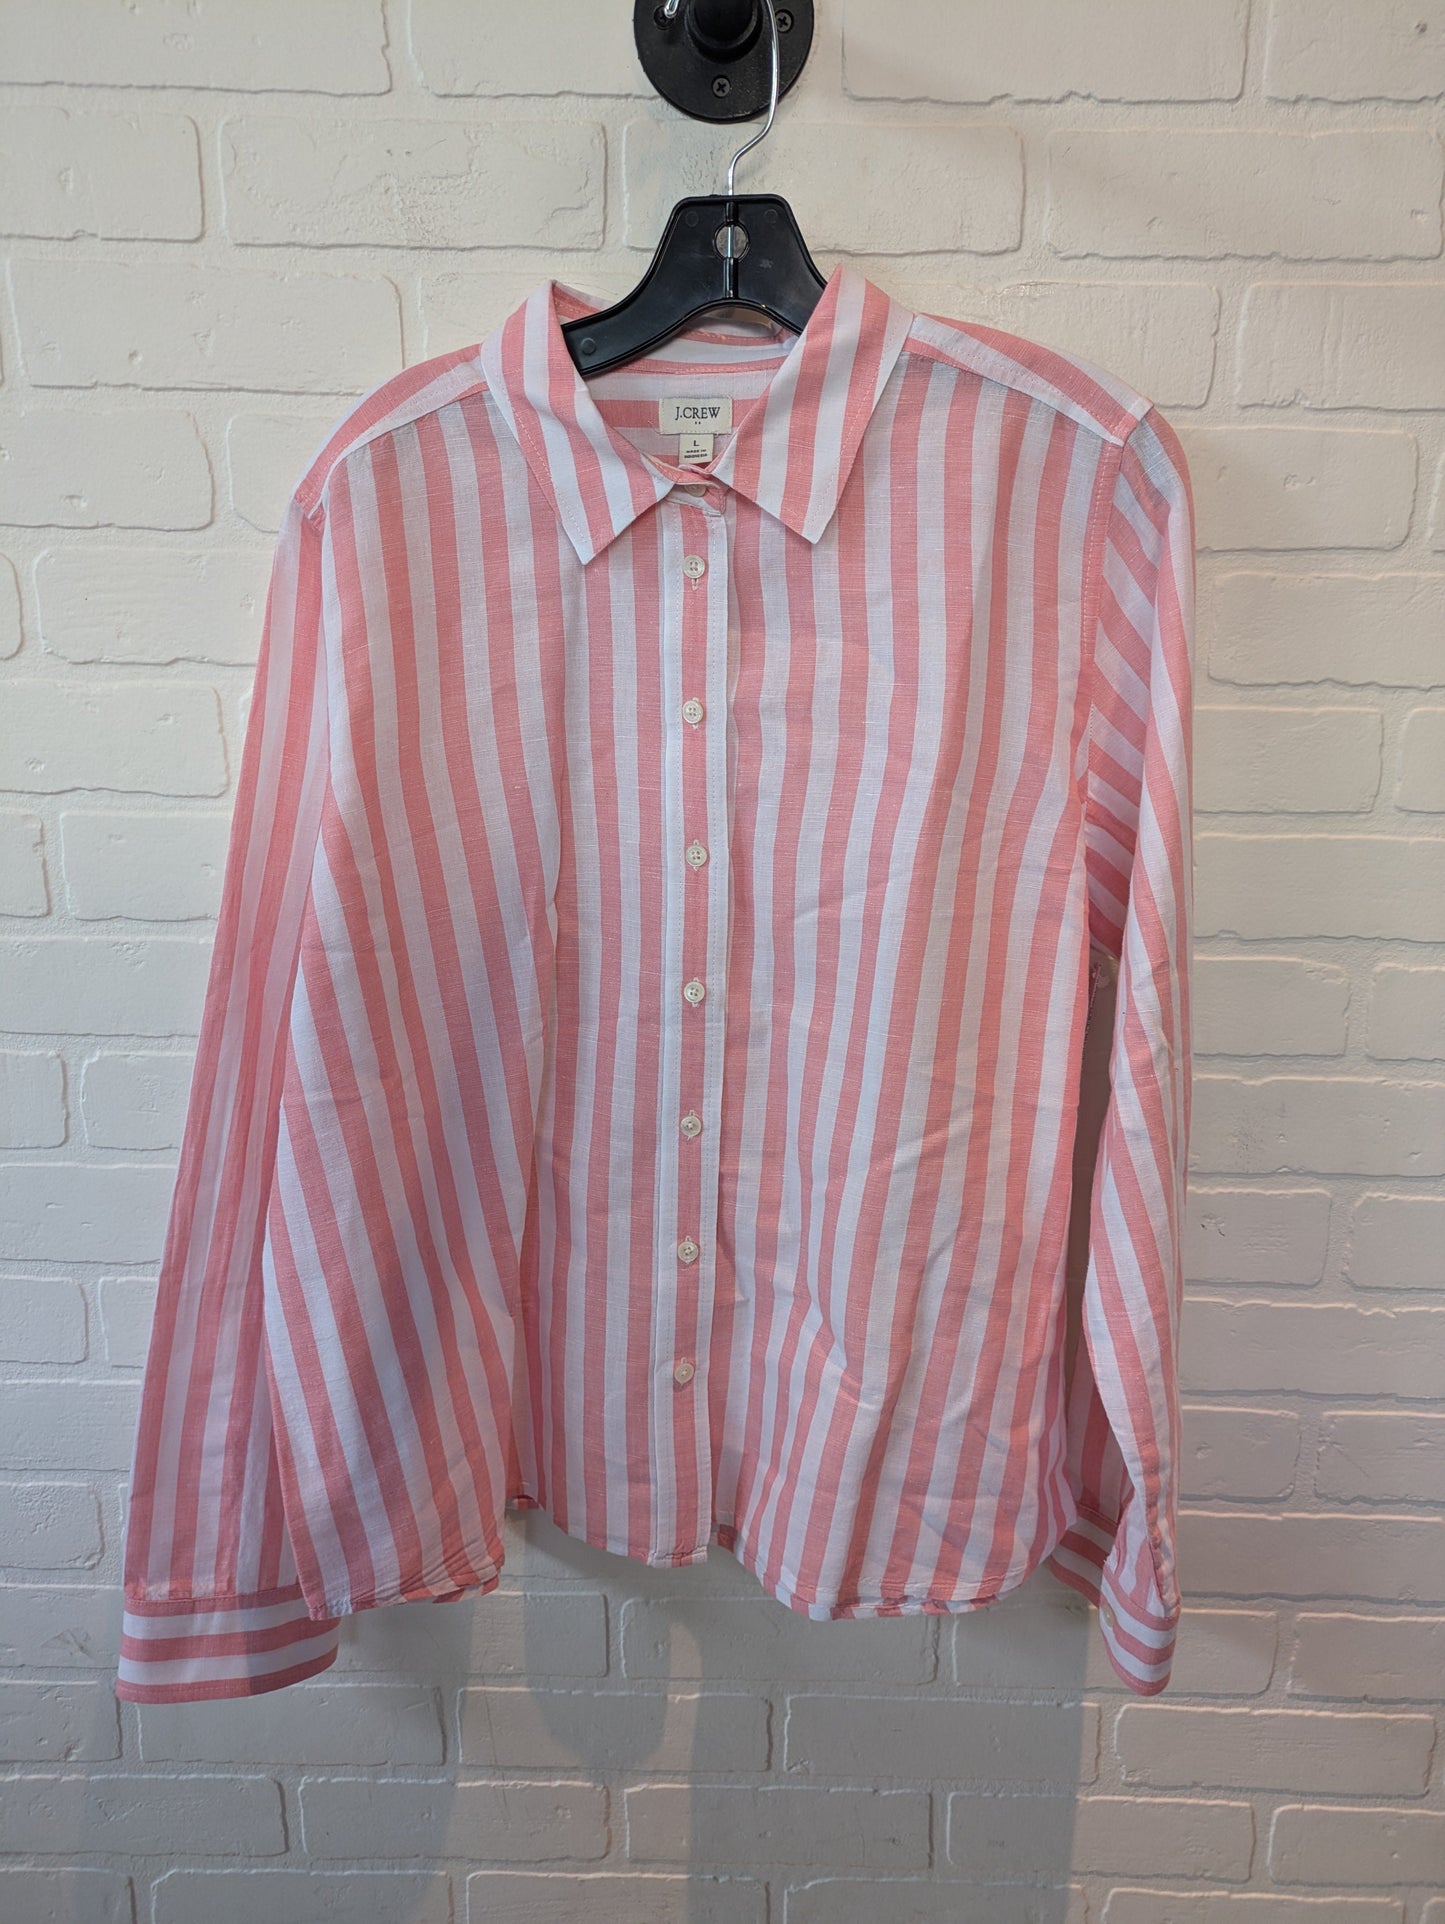 Pink & White Top Long Sleeve J. Crew, Size L